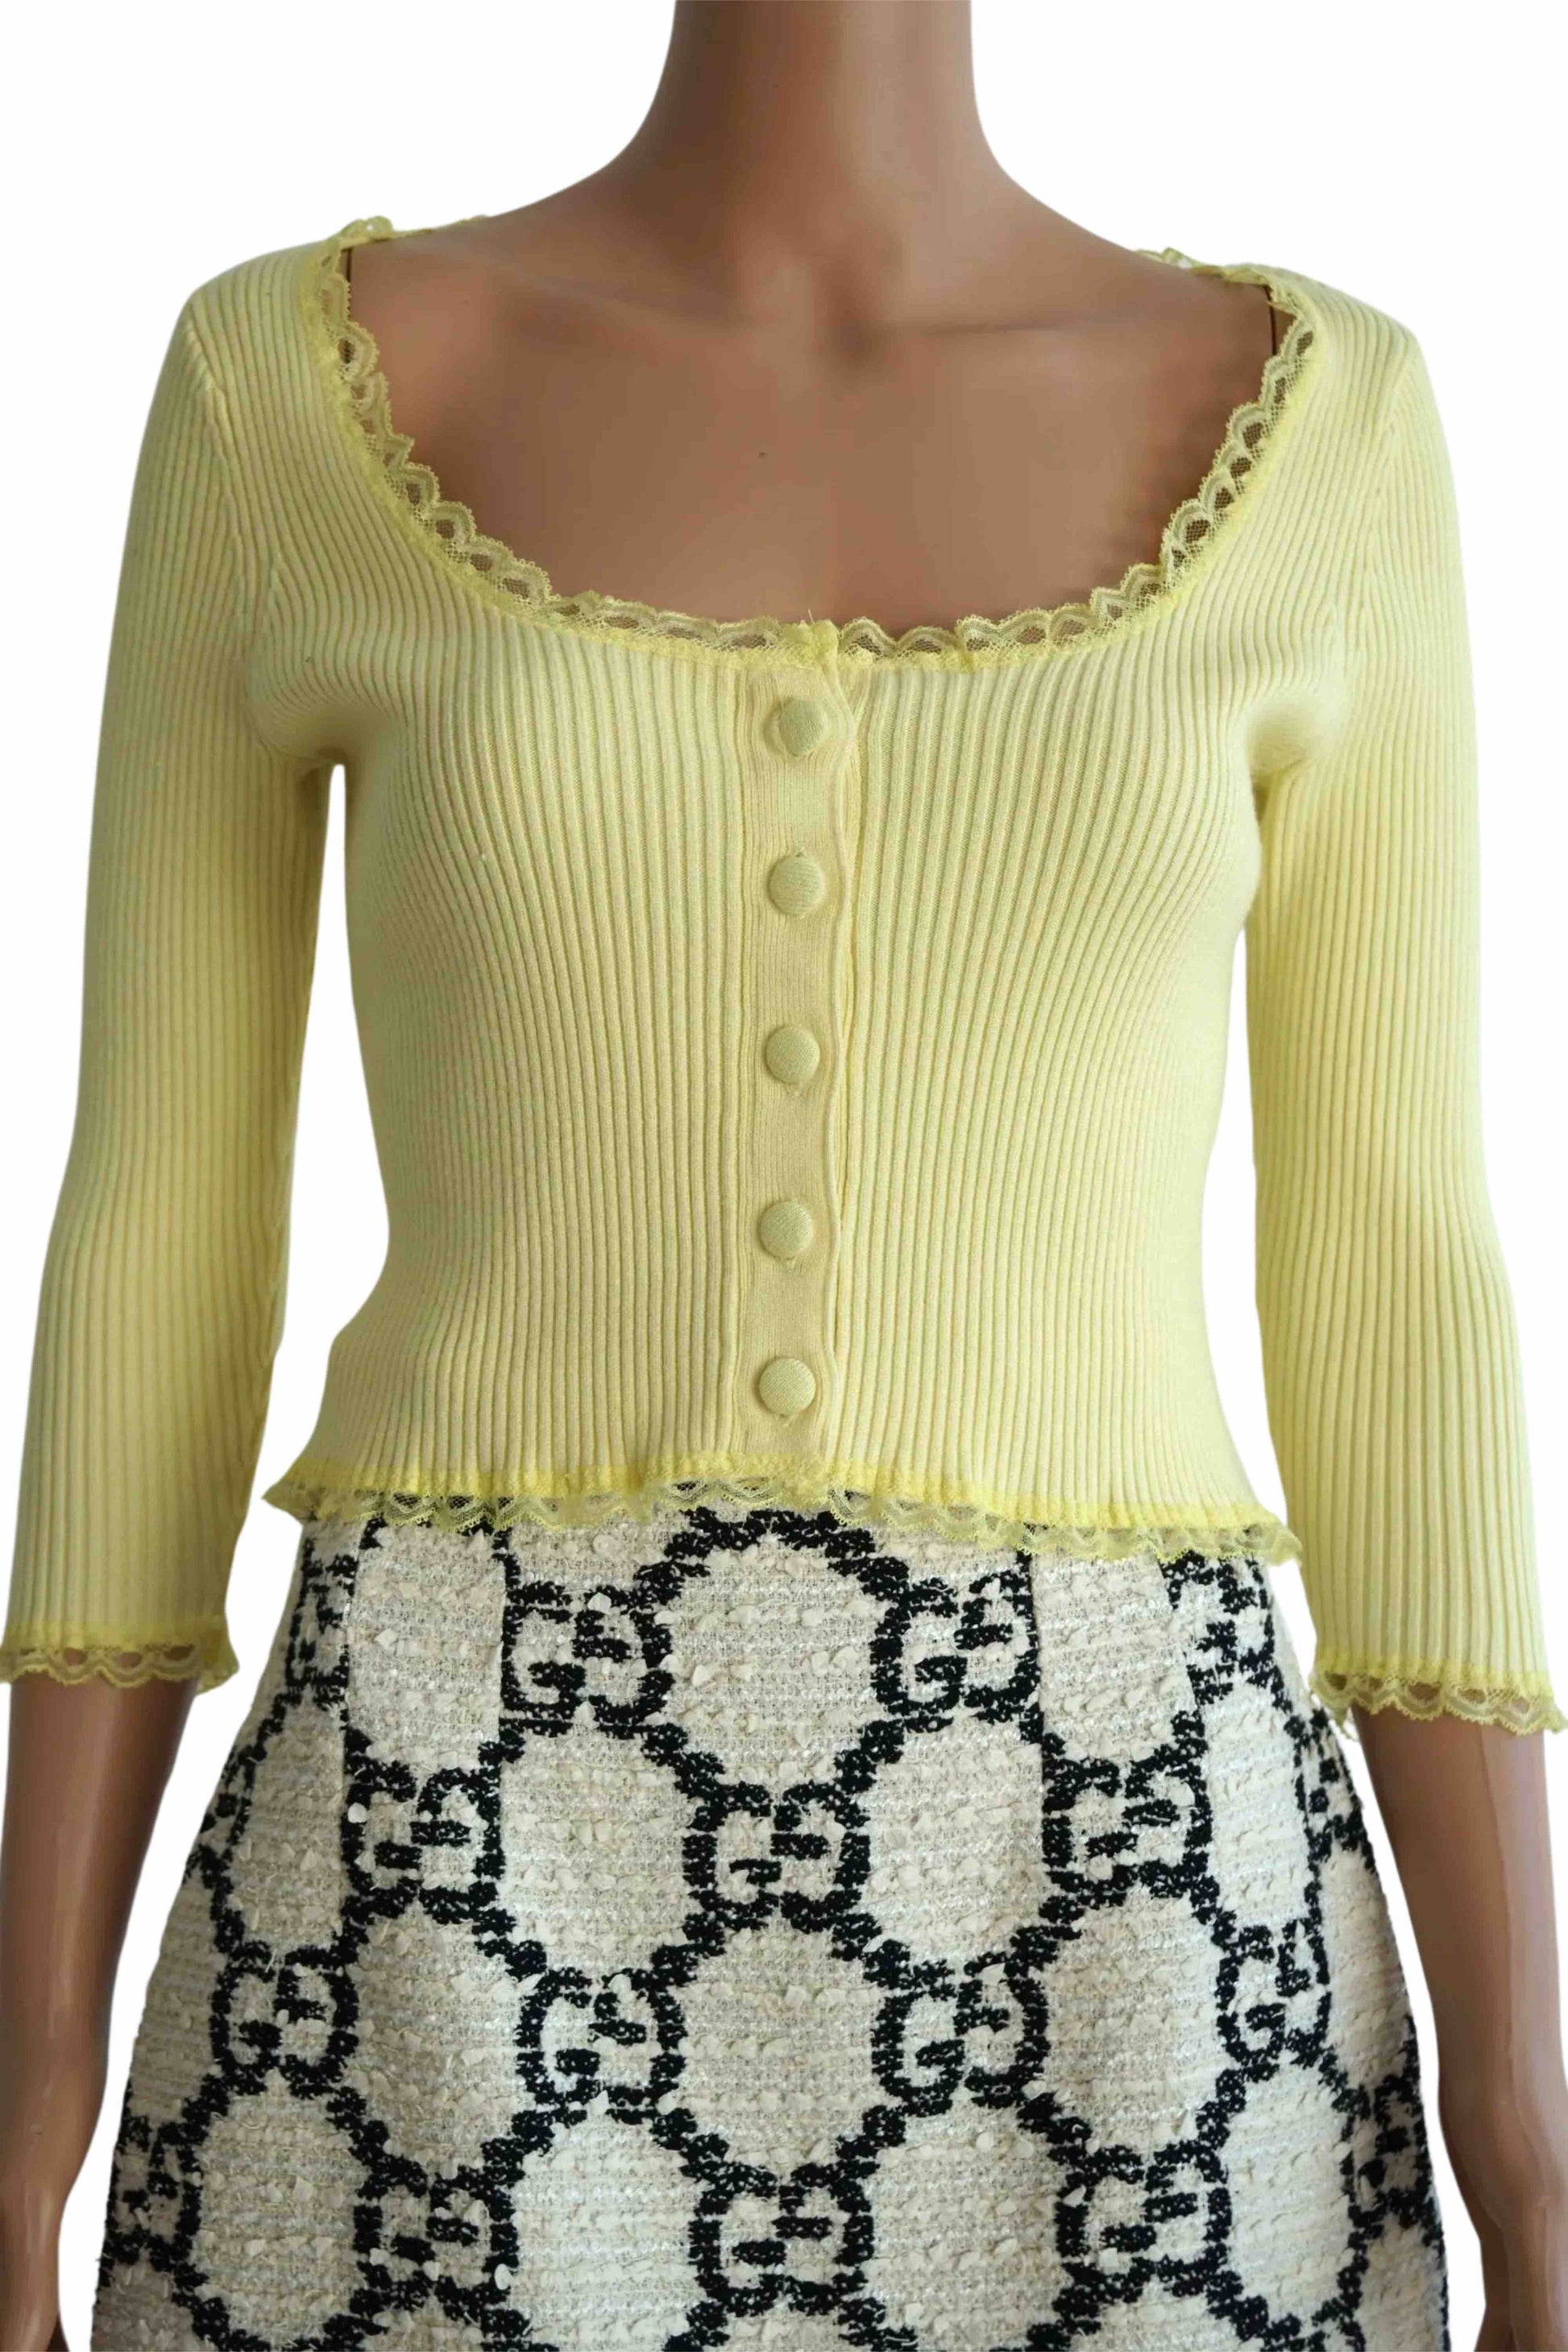 Yellow Knit Top